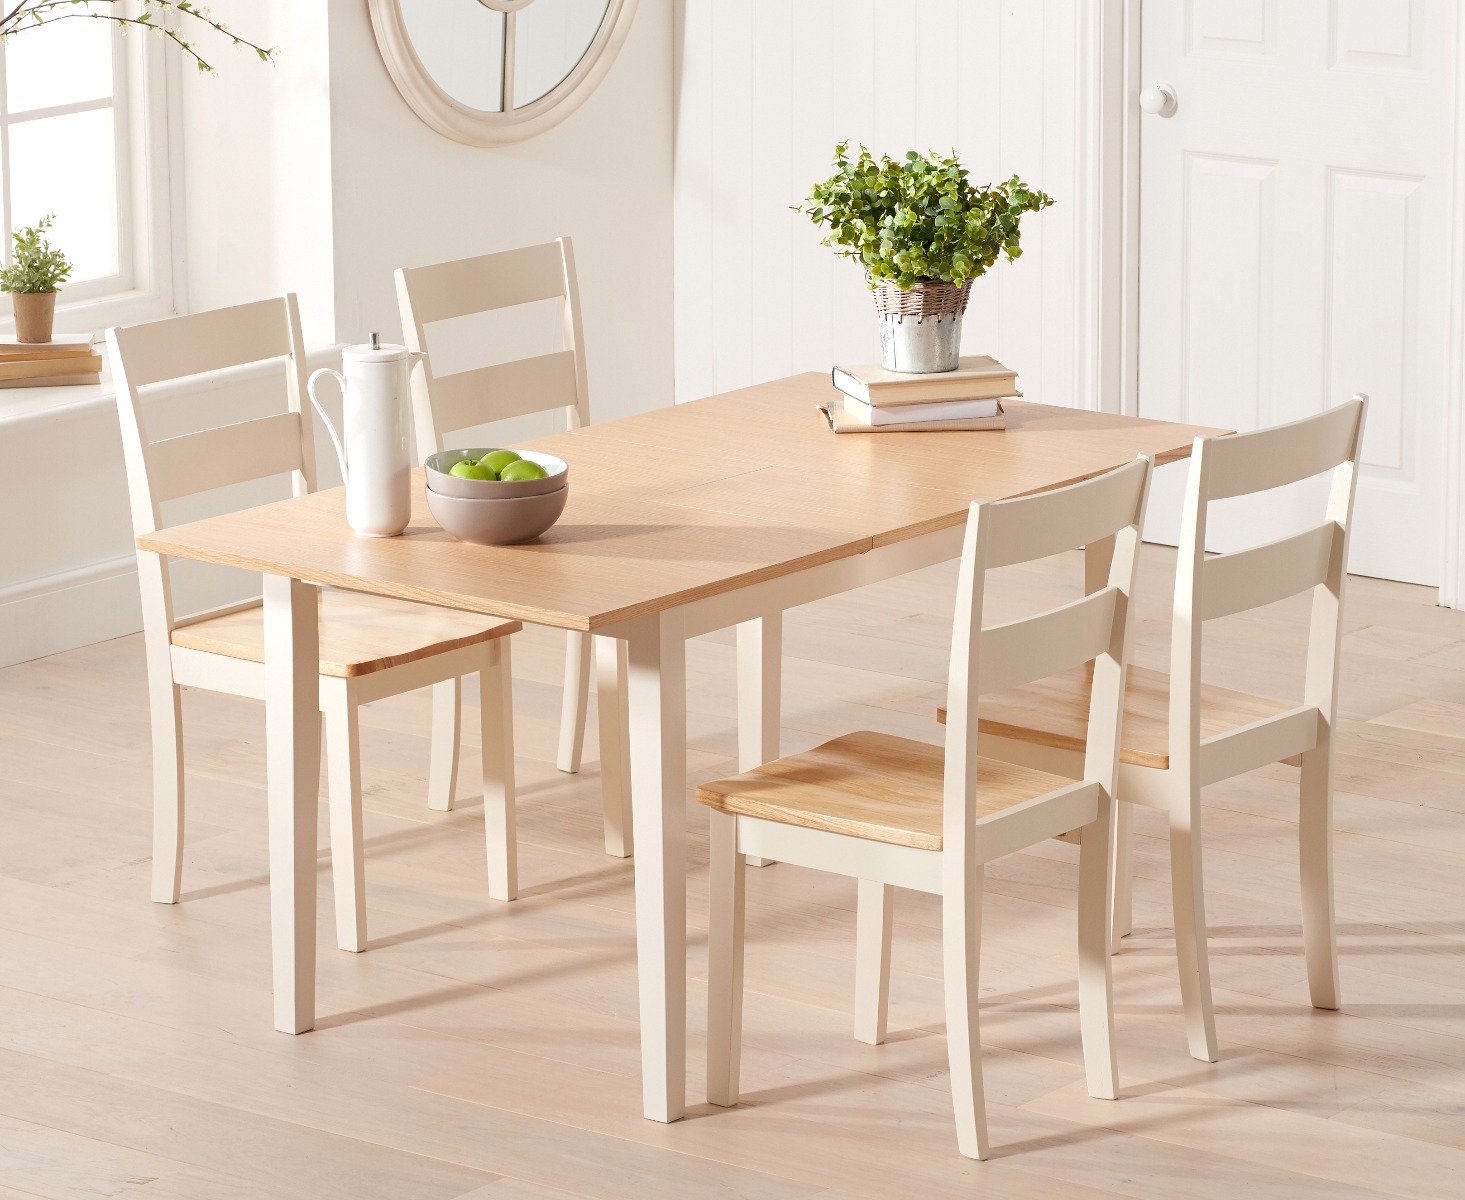 Chiltern 120cm Extending Cream Painted And Oak Table With 6 Cream Chiltern Chairs